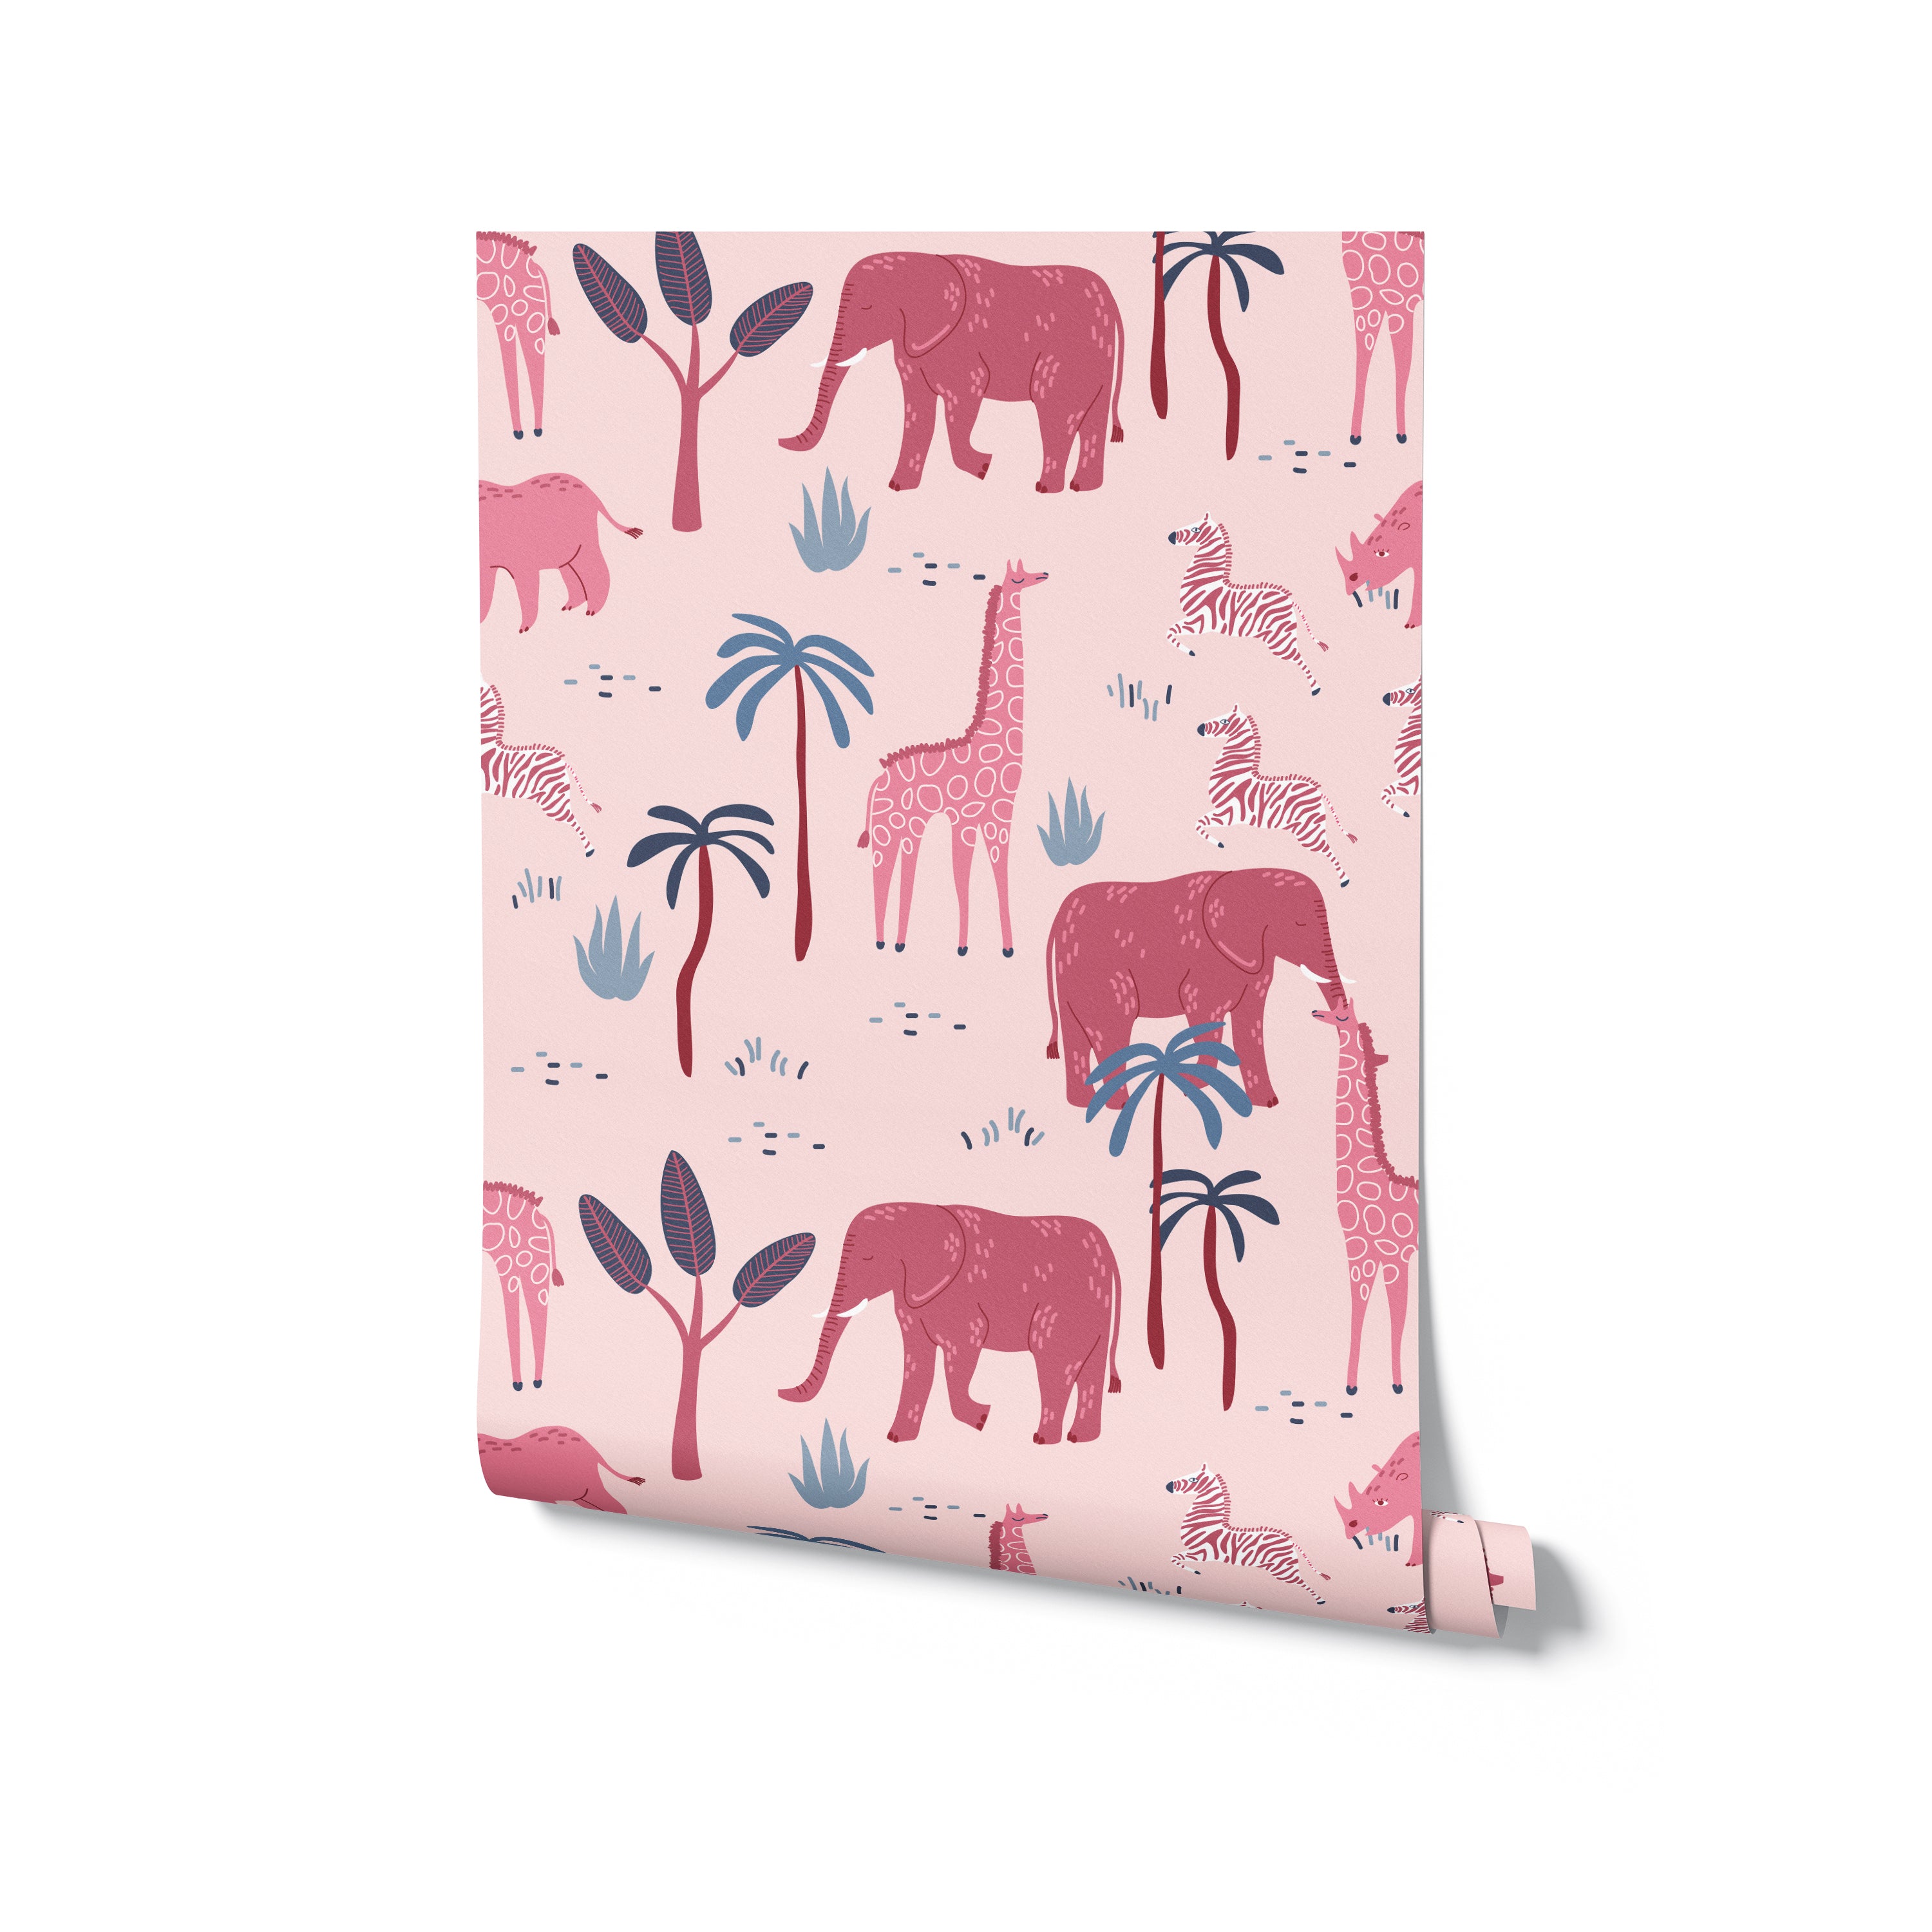 A rolled panel of the pink safari-themed wallpaper showcasing the repeating pattern of elephants, giraffes, and zebras, perfect for adding a playful touch to any room.